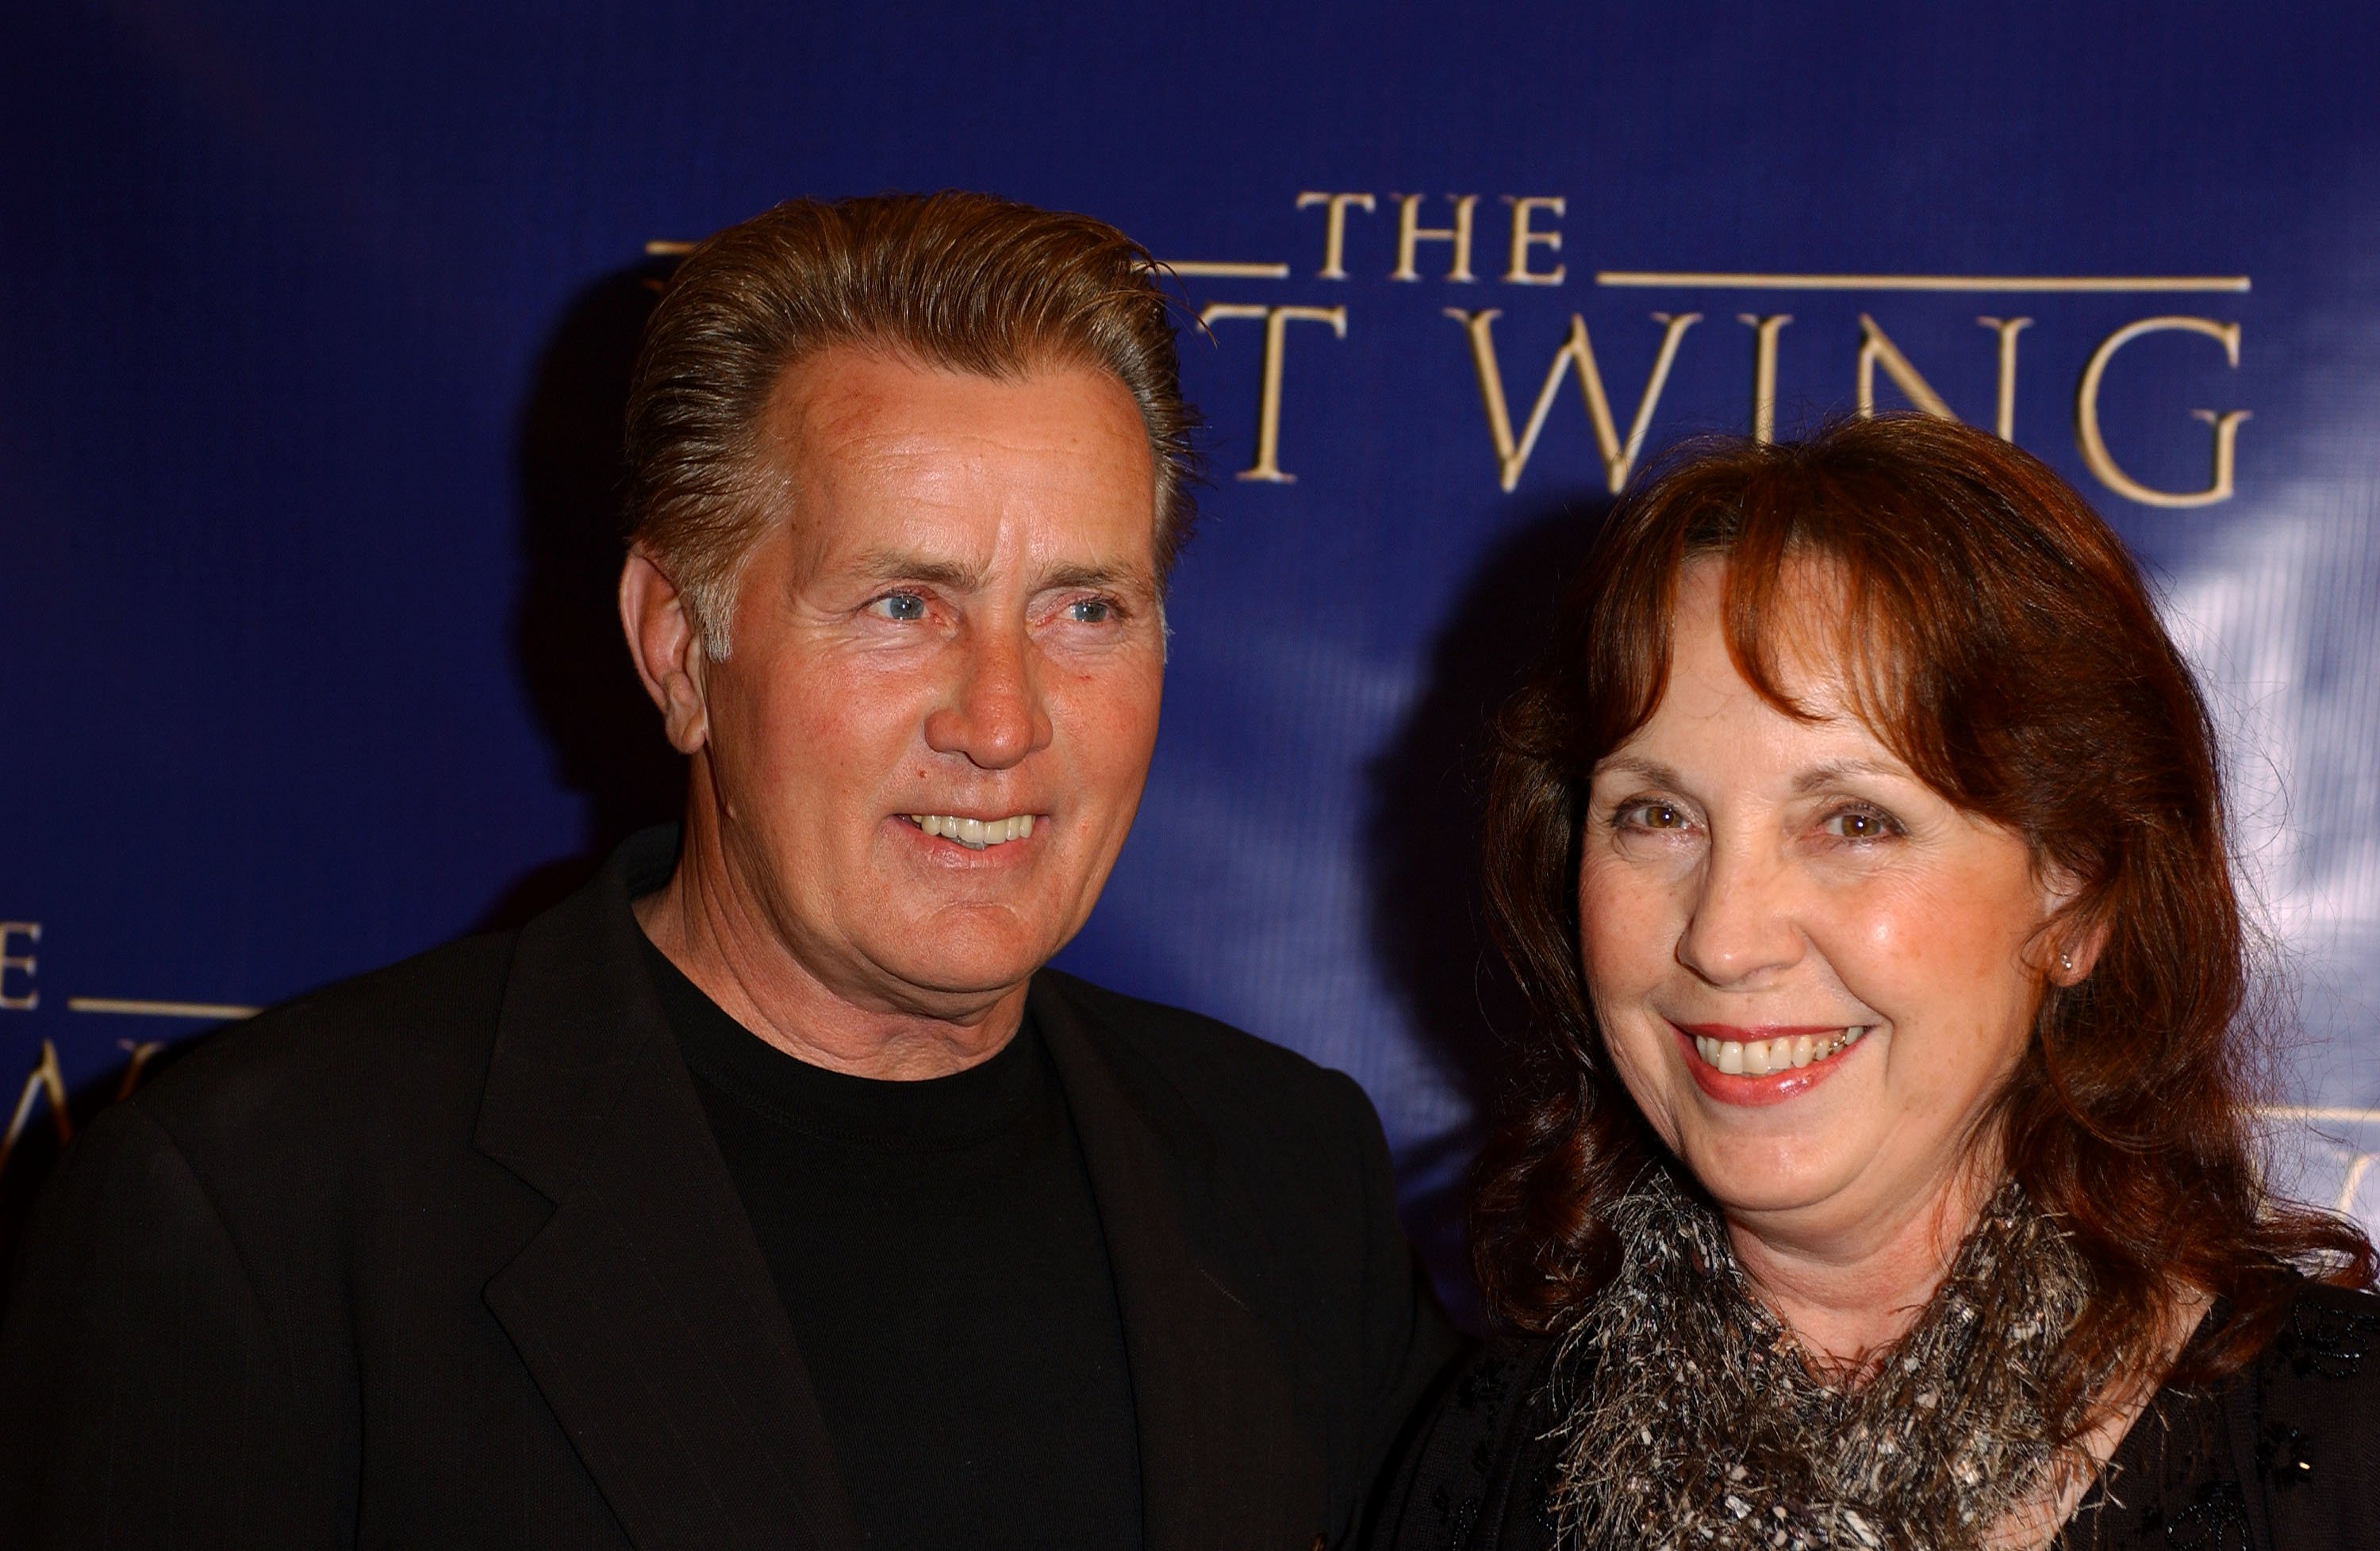 Martin Sheen and Janet Templeton arrive at the"The West Wing" 100th Episode celebration at The Four Seasons Hotel on November 1, 2003 in Beverly Hills, California.┃Source: Getty Images